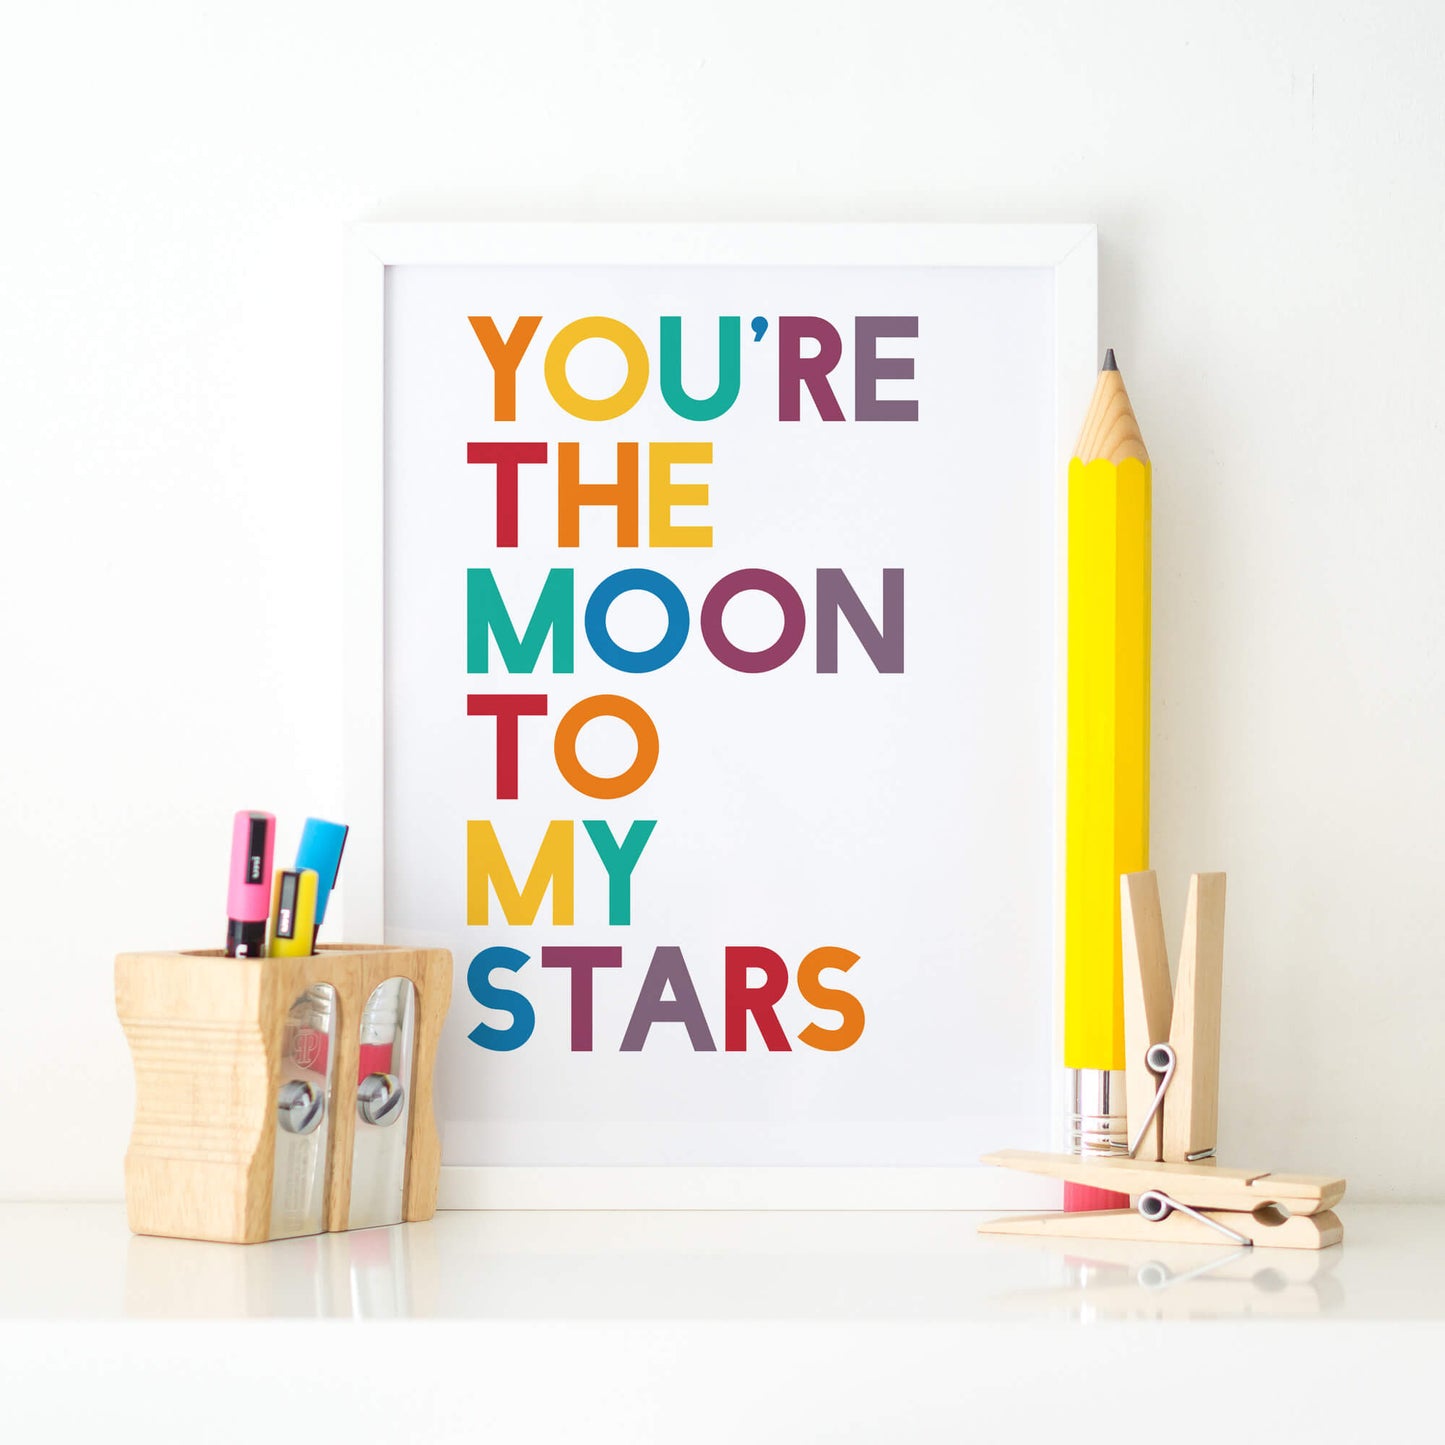 You're The Moon To My Stars Poster by SixElevenCreations. Product Code SEP0209